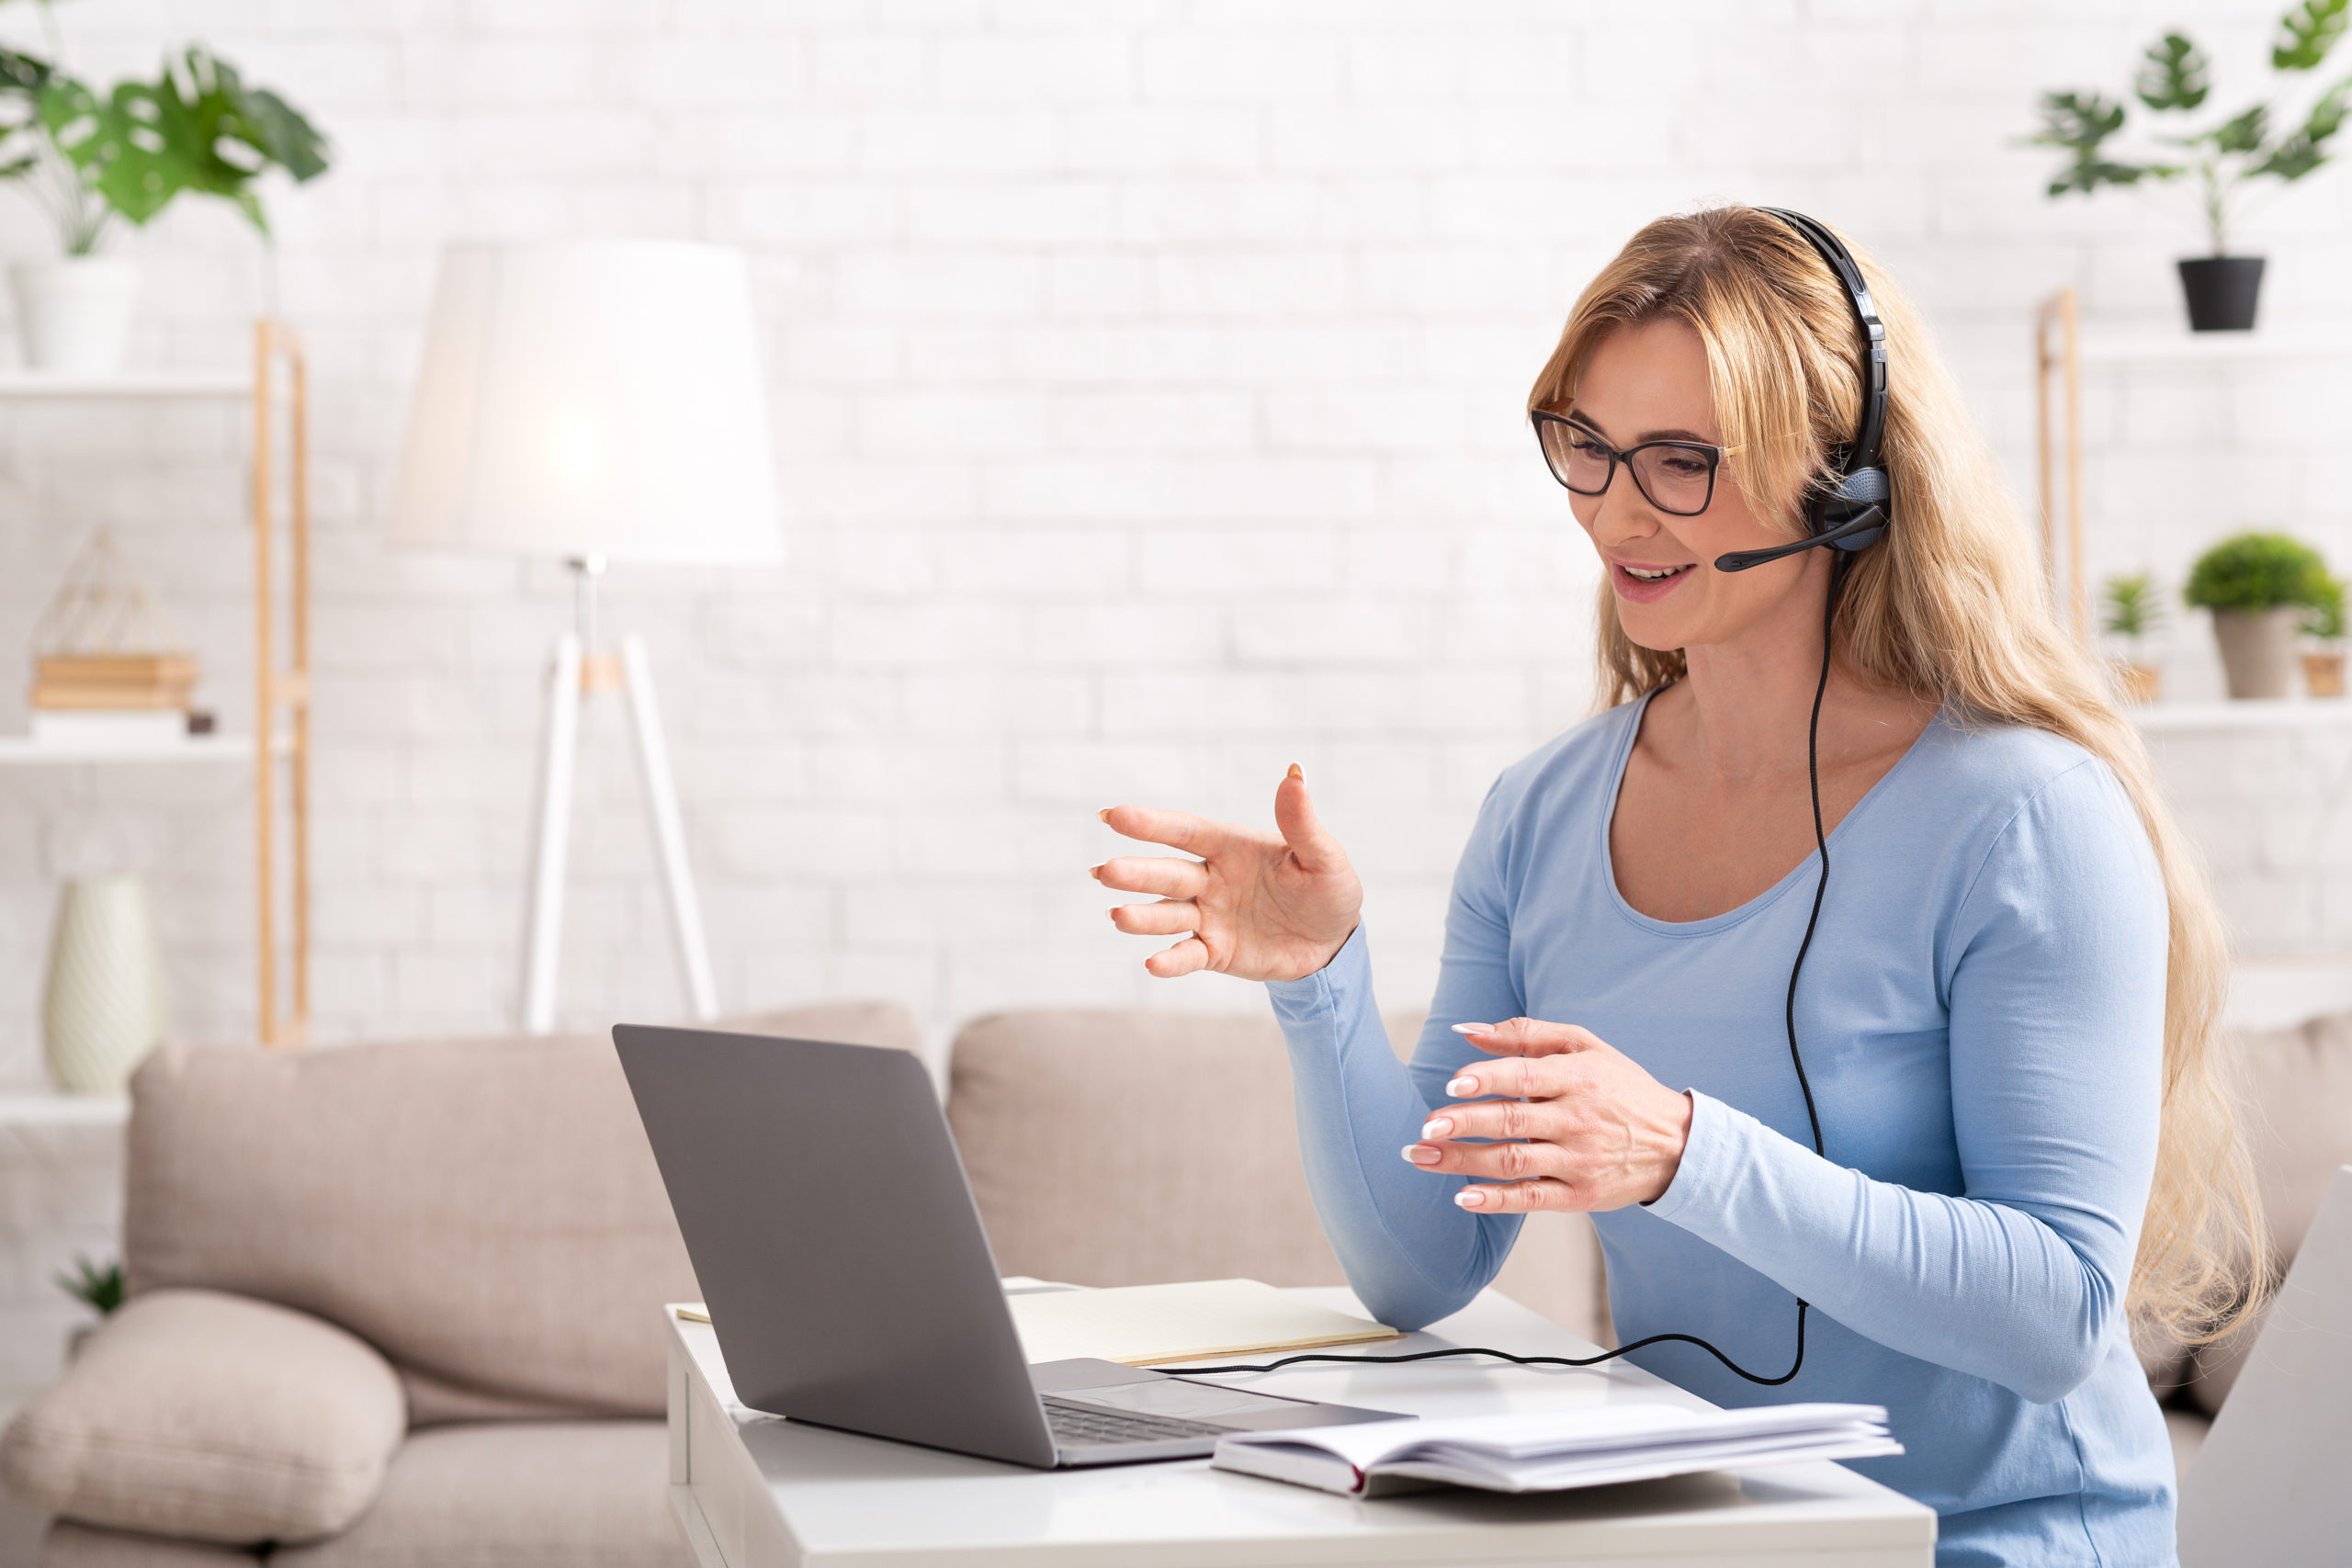 Business video call. Busy woman in glasses and headphones explains to client on laptop, in living room interior